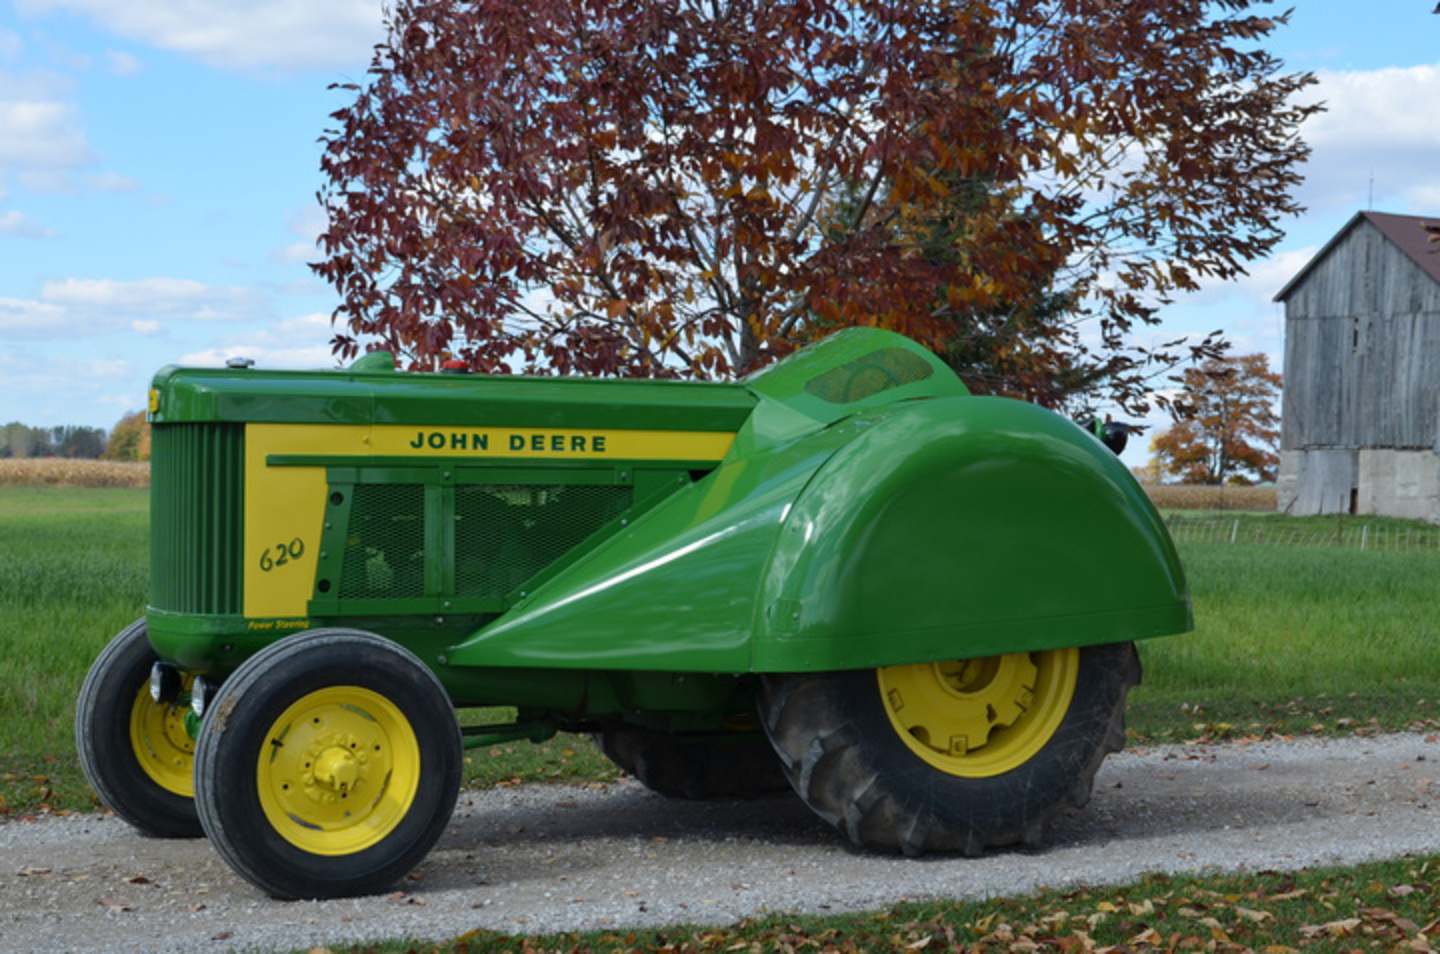 John Deere Tractors Discussion Board - 620 orchard pictures